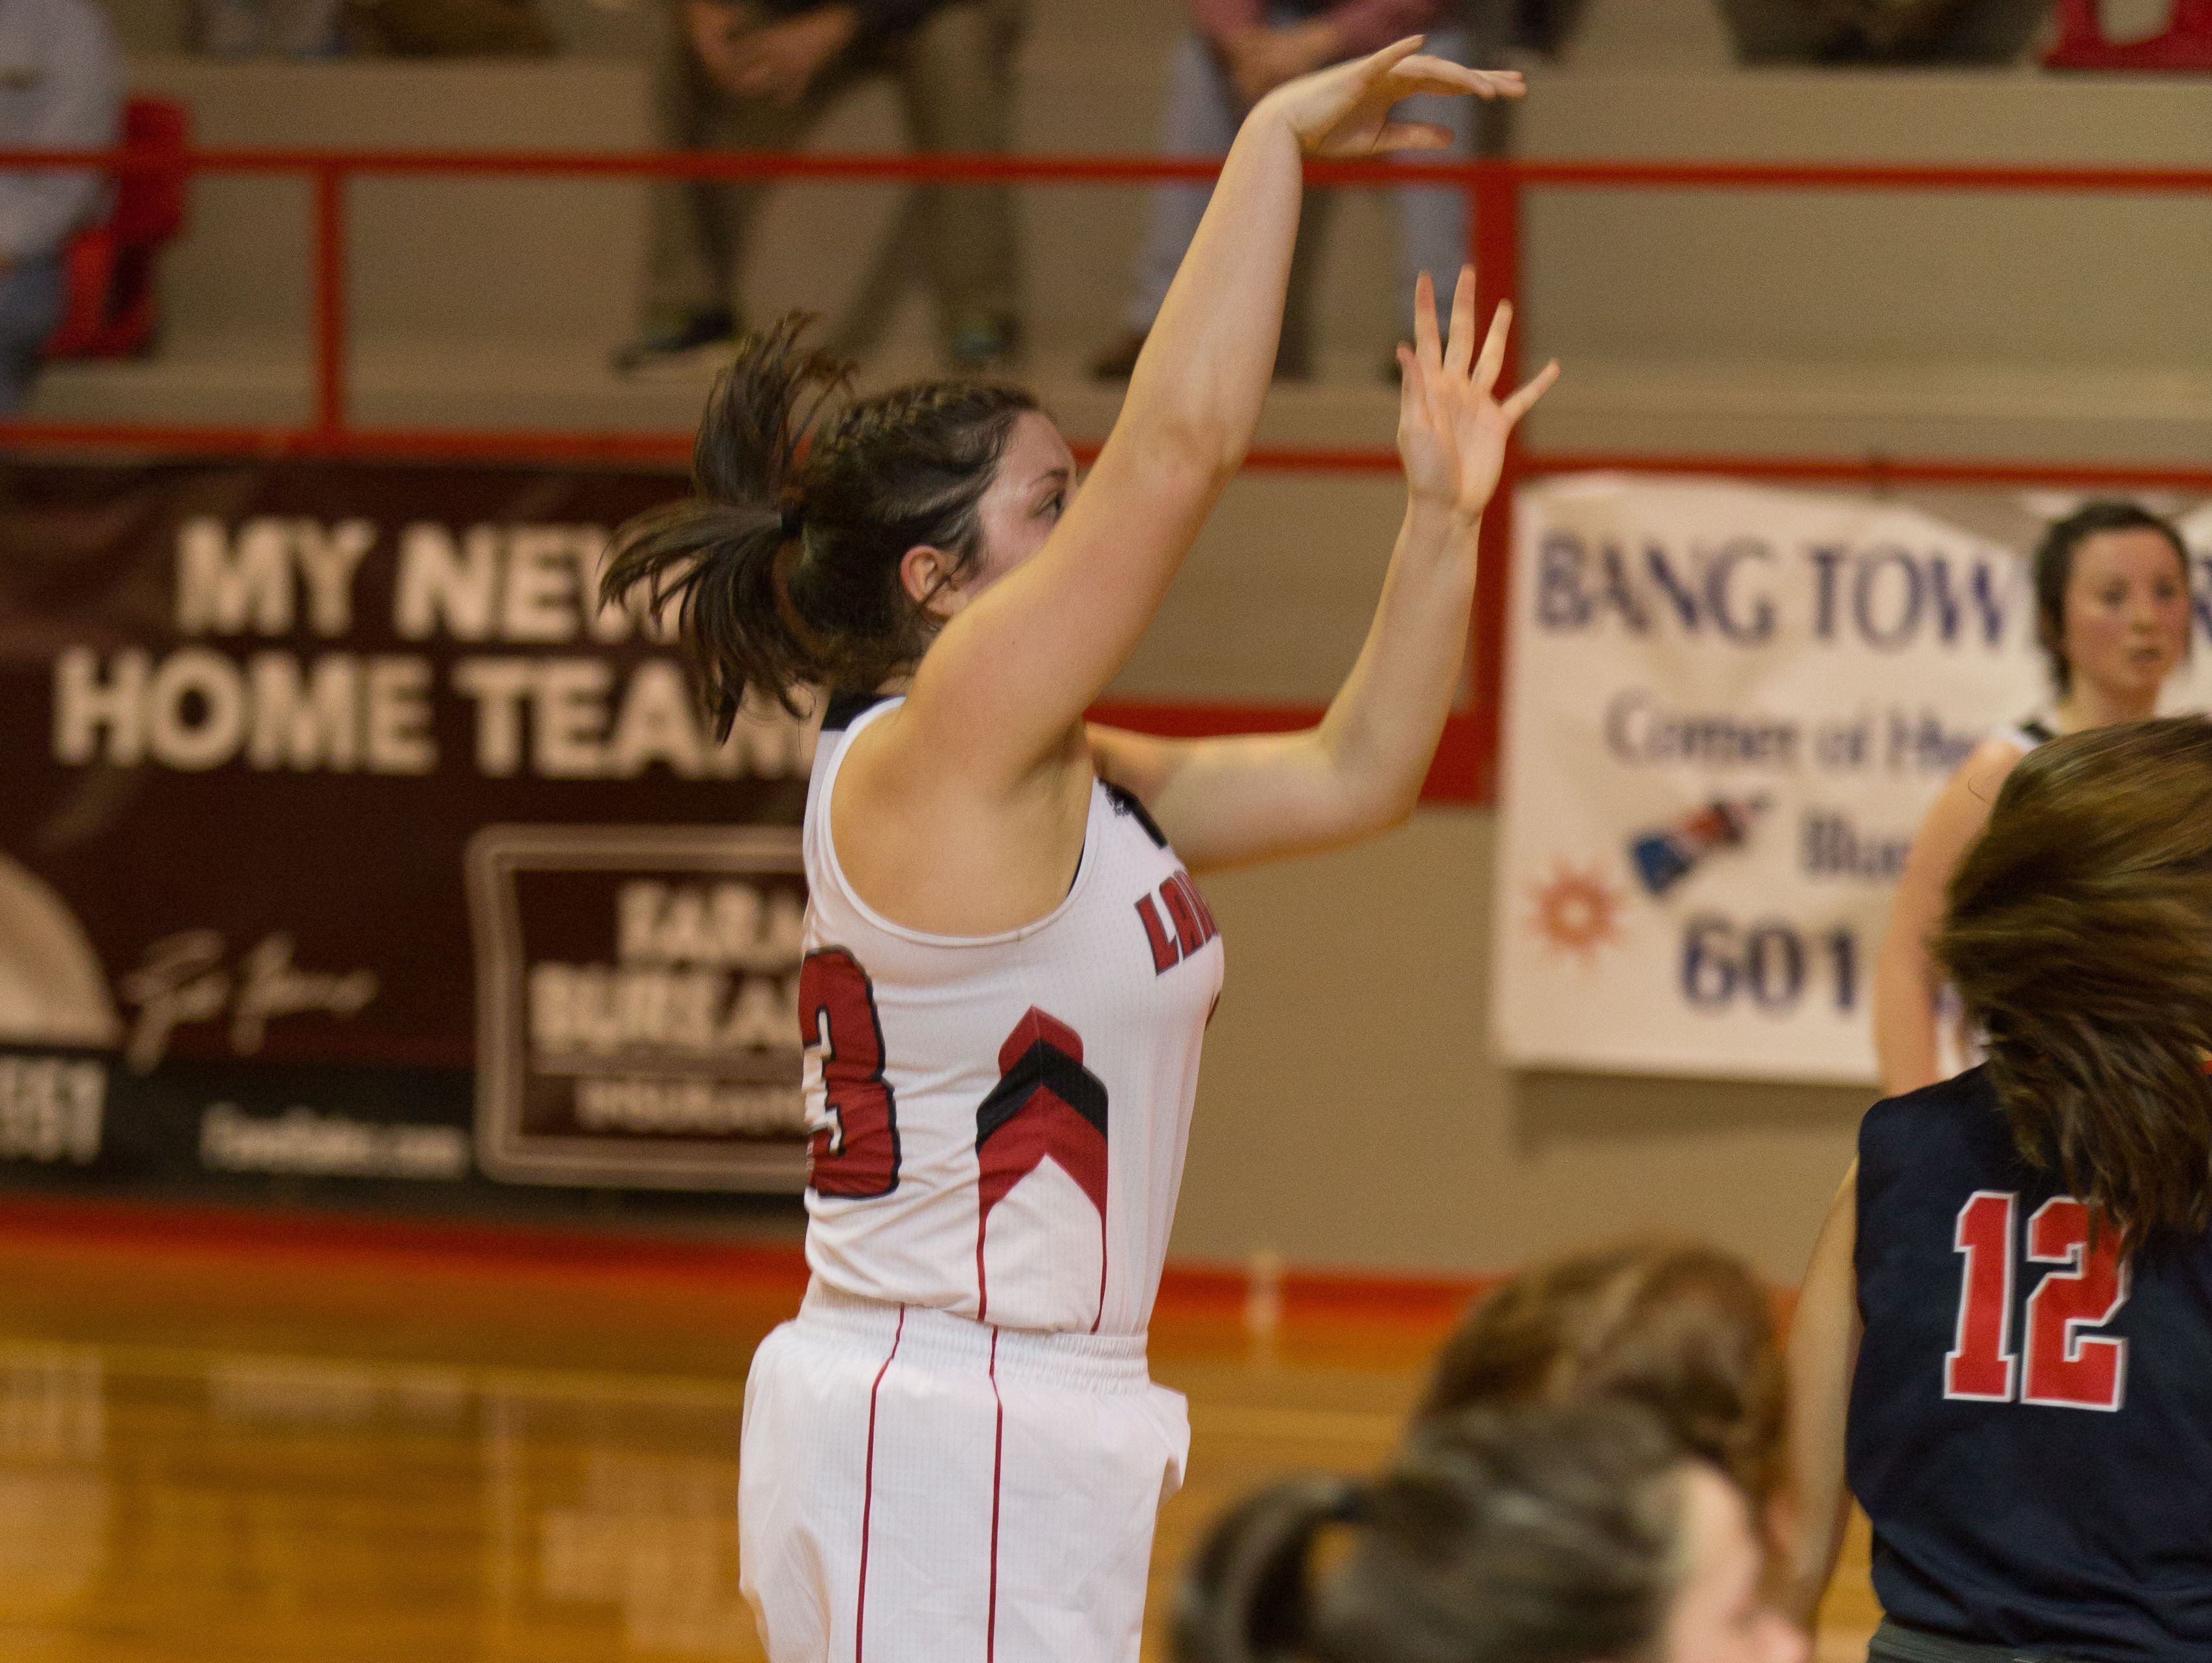 Jaylee Riggs shoots a free throw during an MAIS Class A state semifinal game on Friday.